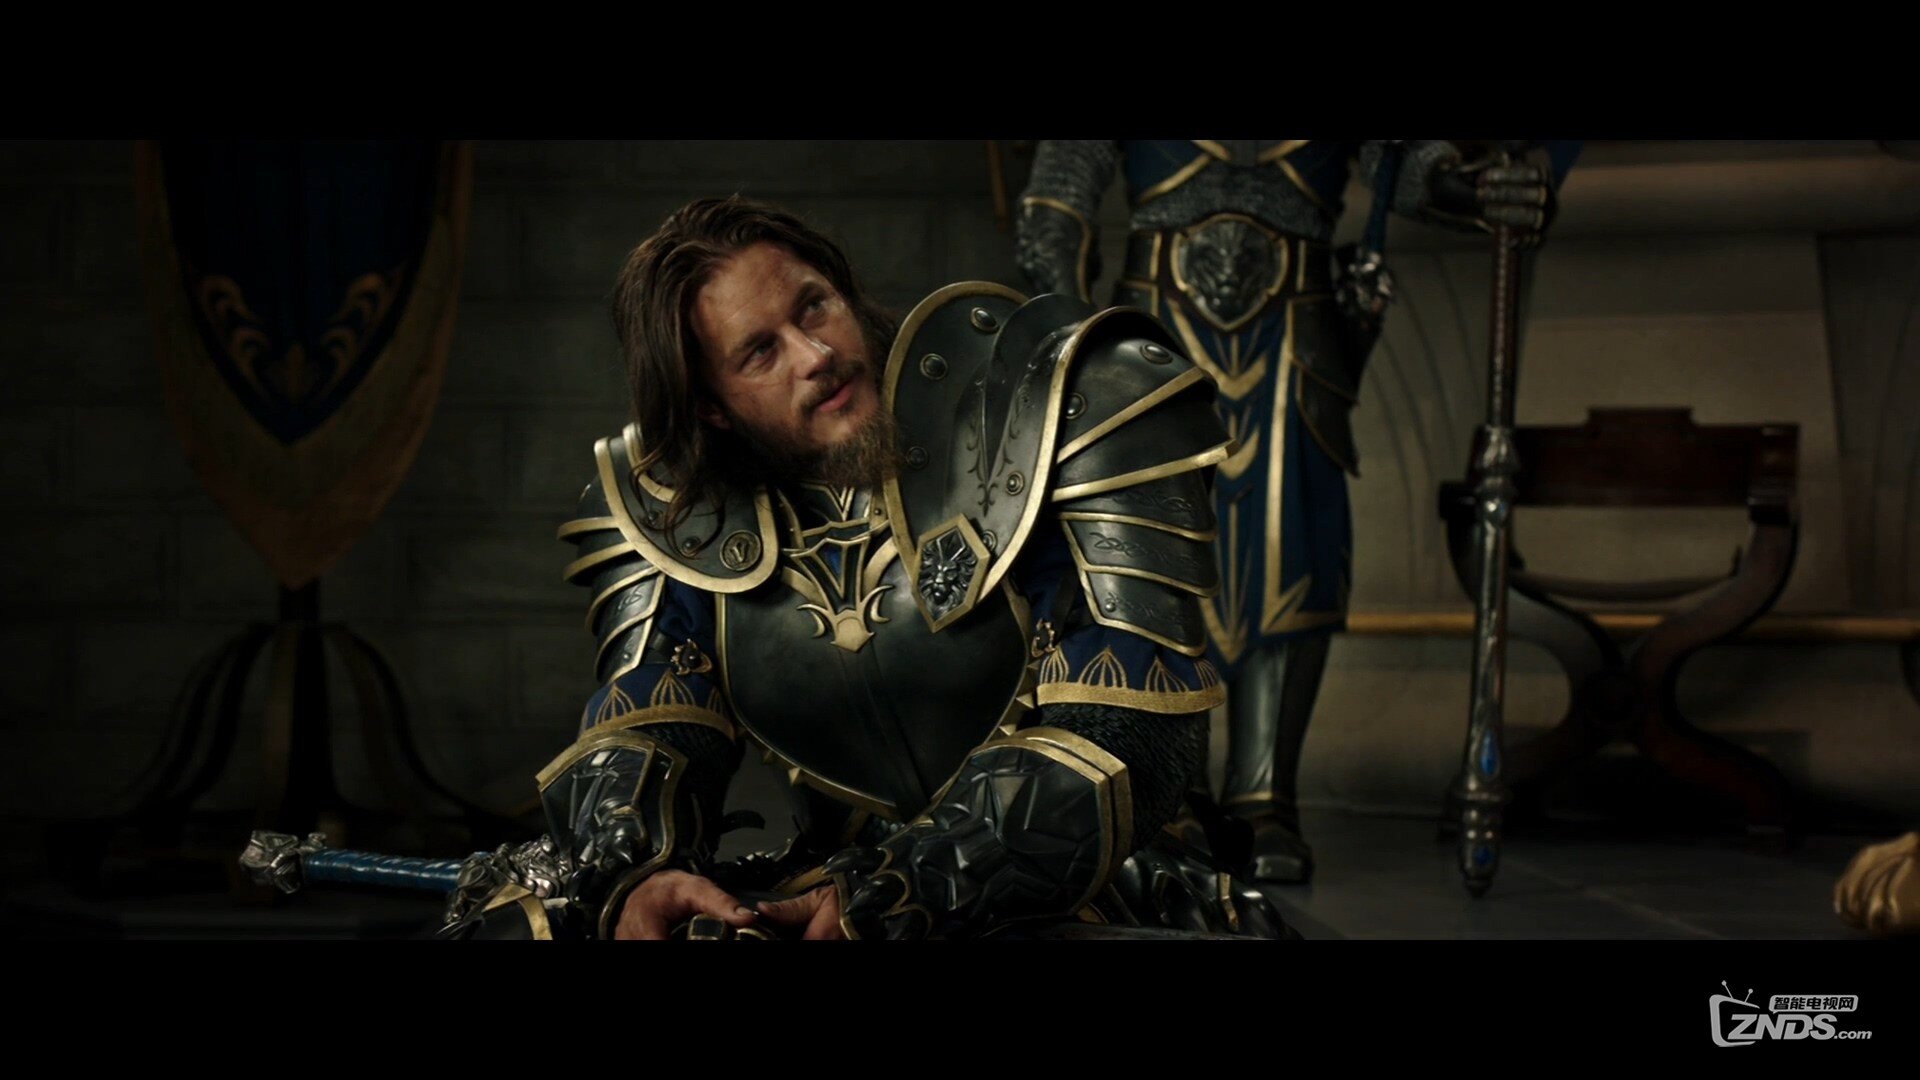 Warcraft_Trailer1_Texted_Stereo_PCM_1080p.mov_20160214_211645.578.jpg